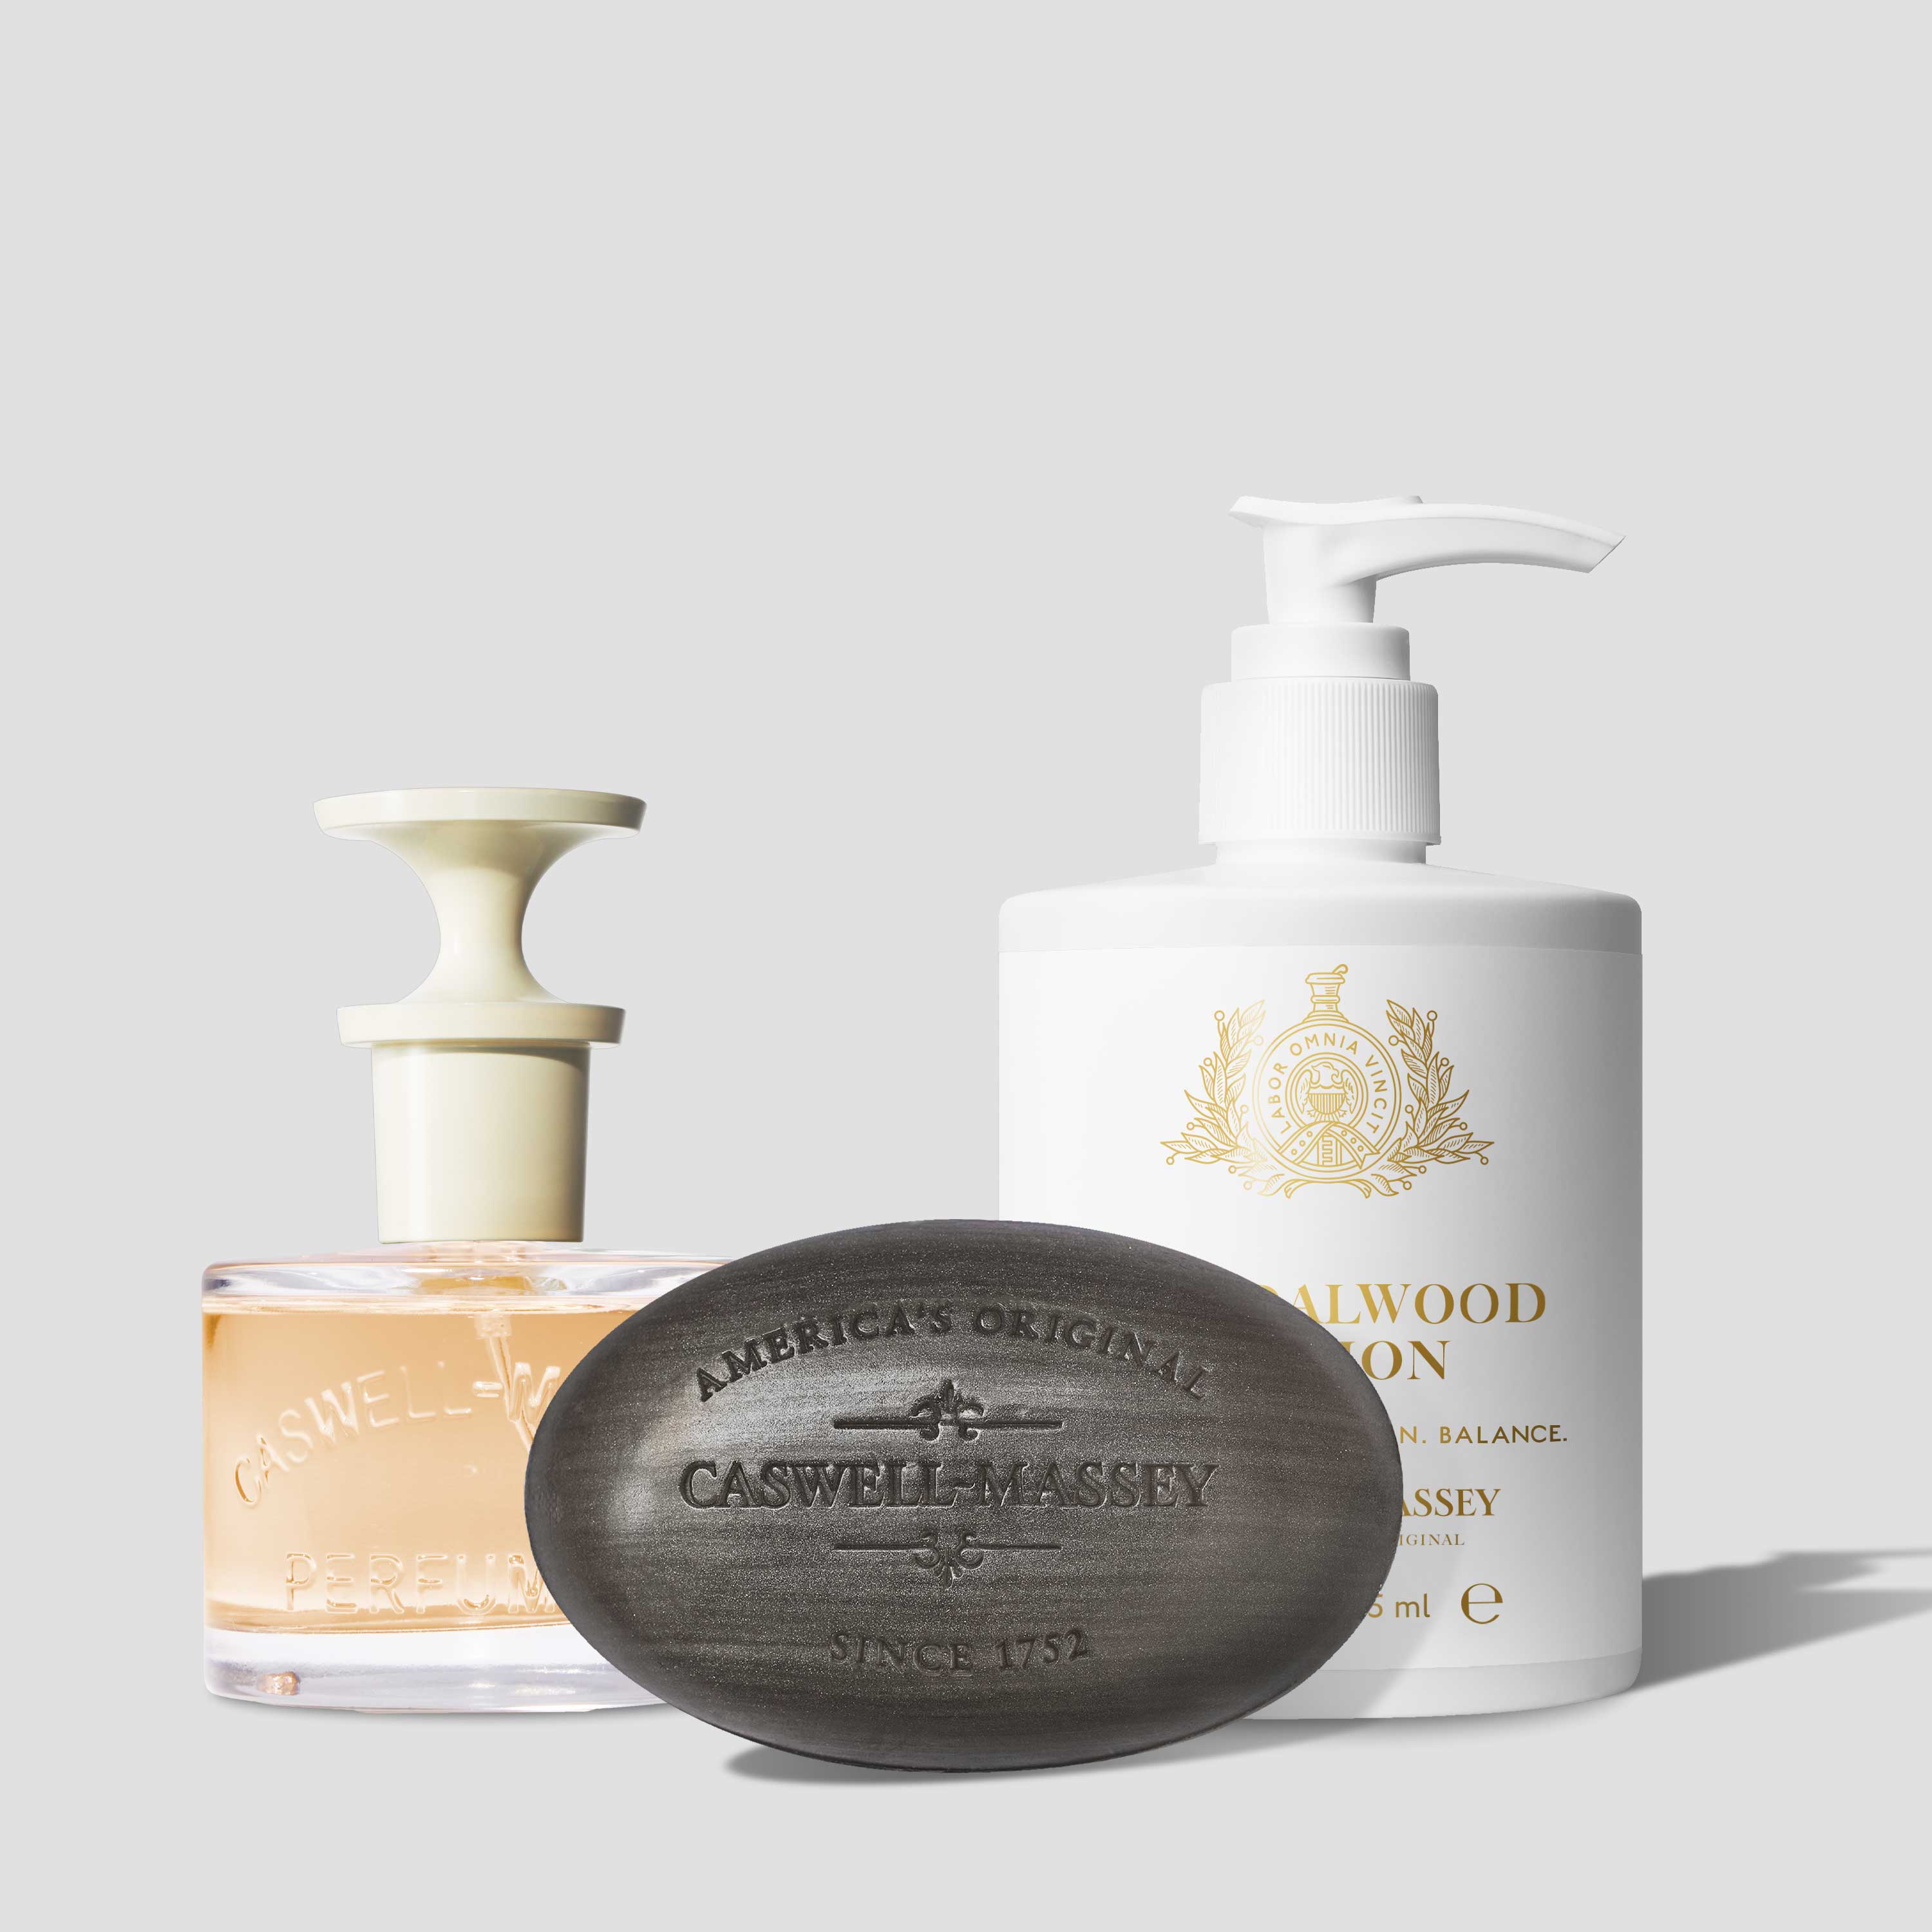 Caswell-Massey Sandalwood Collection featuring Sandalwood Eau de Toilette, Sandalwood Luxury Bar Soap, and Sandalwood Lotion for hands and body